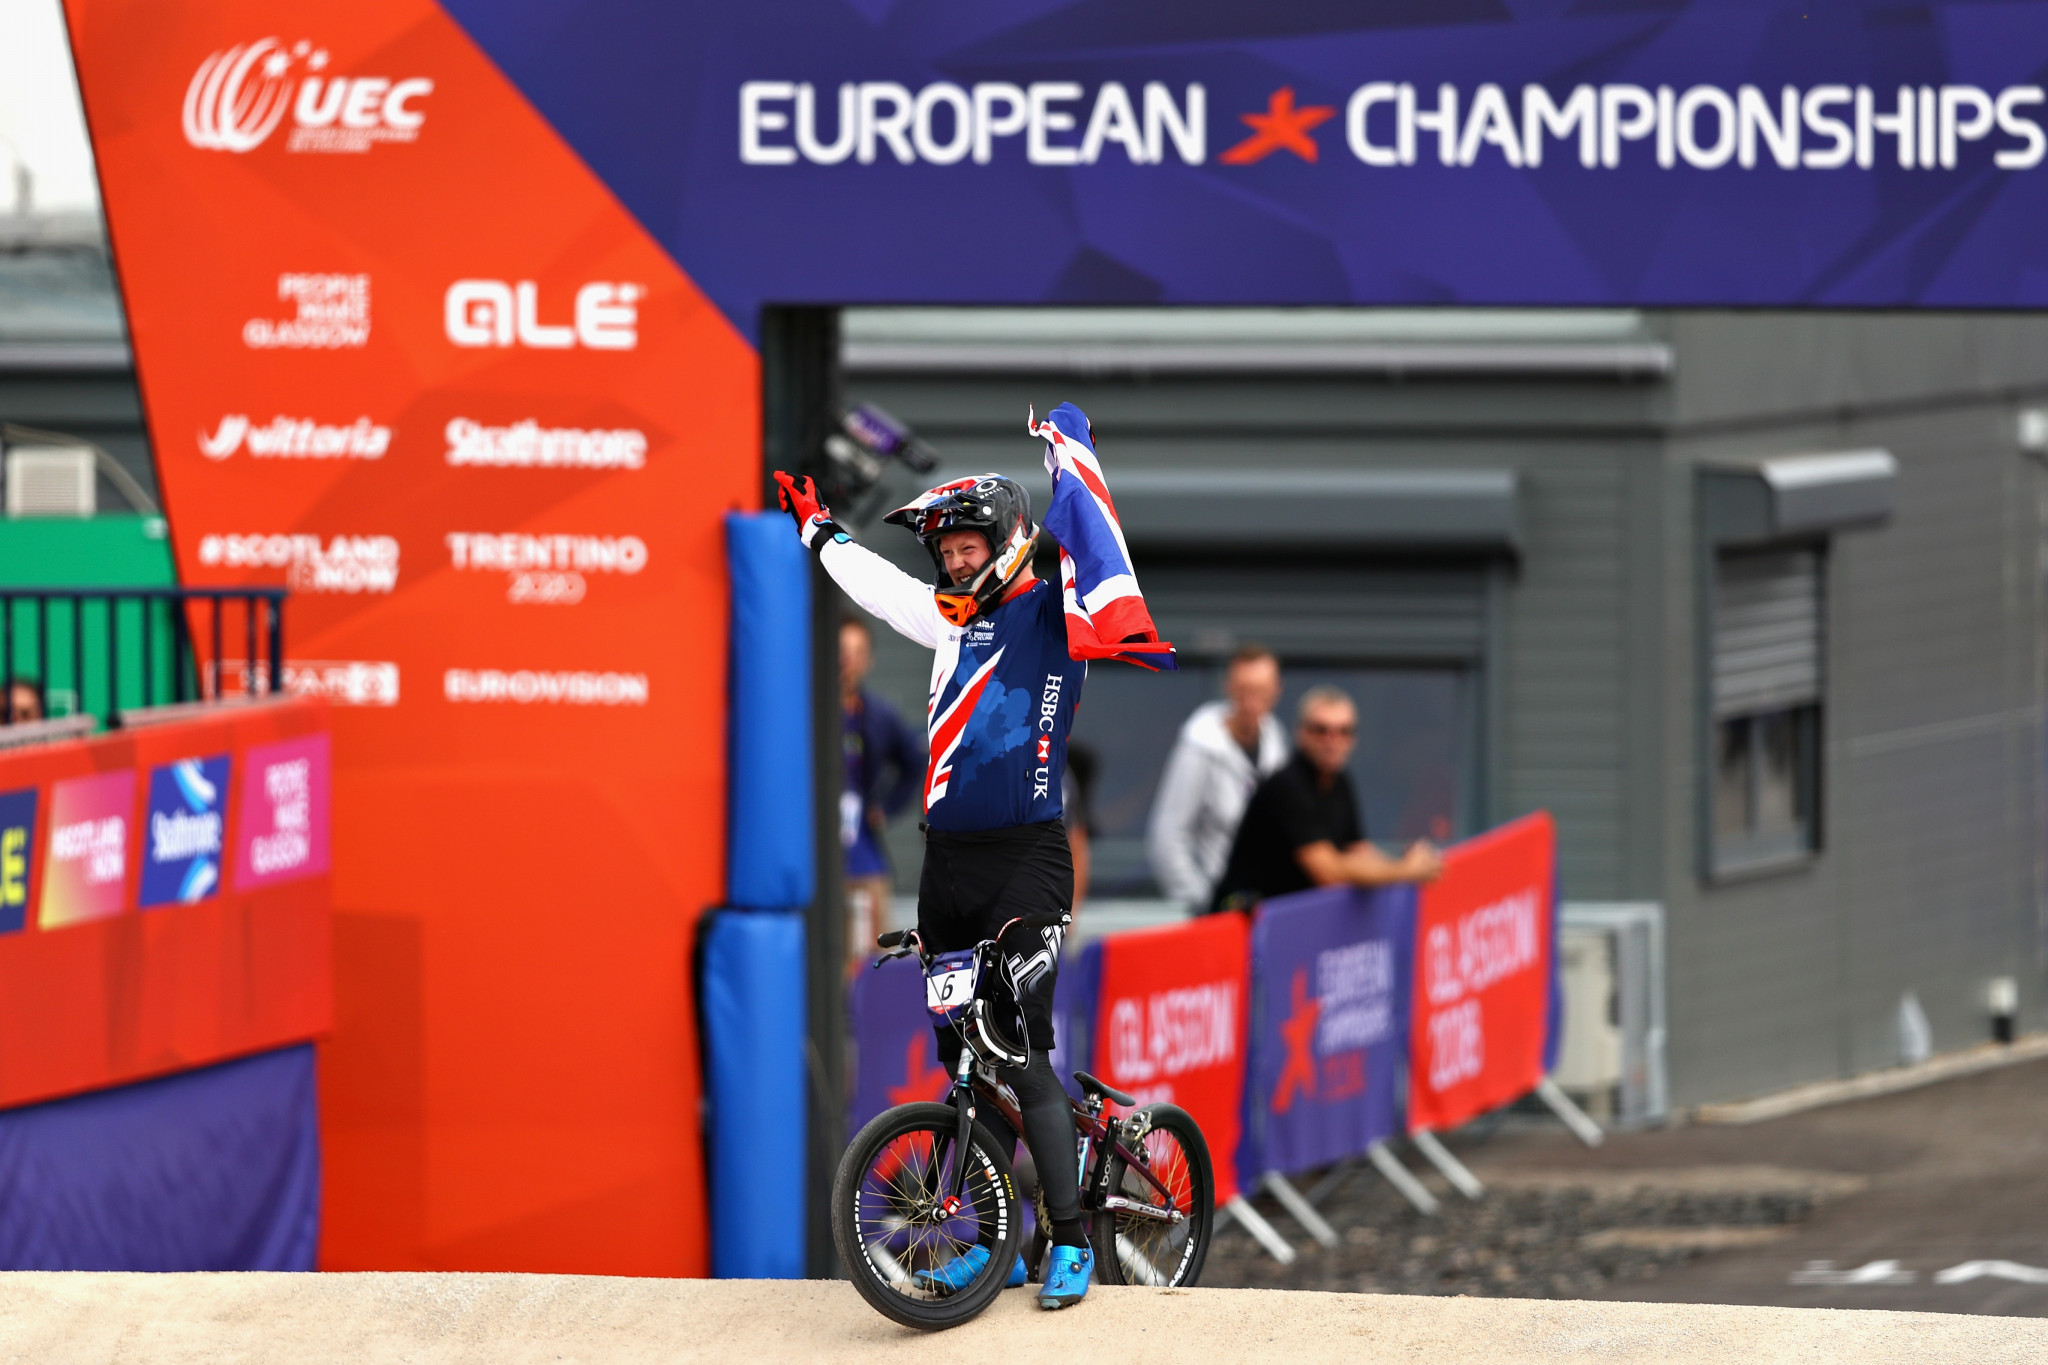 Great Britain's Kyle Evans delighted the home crowd by coming out on top in the men's BMX cycling event ©Getty Images